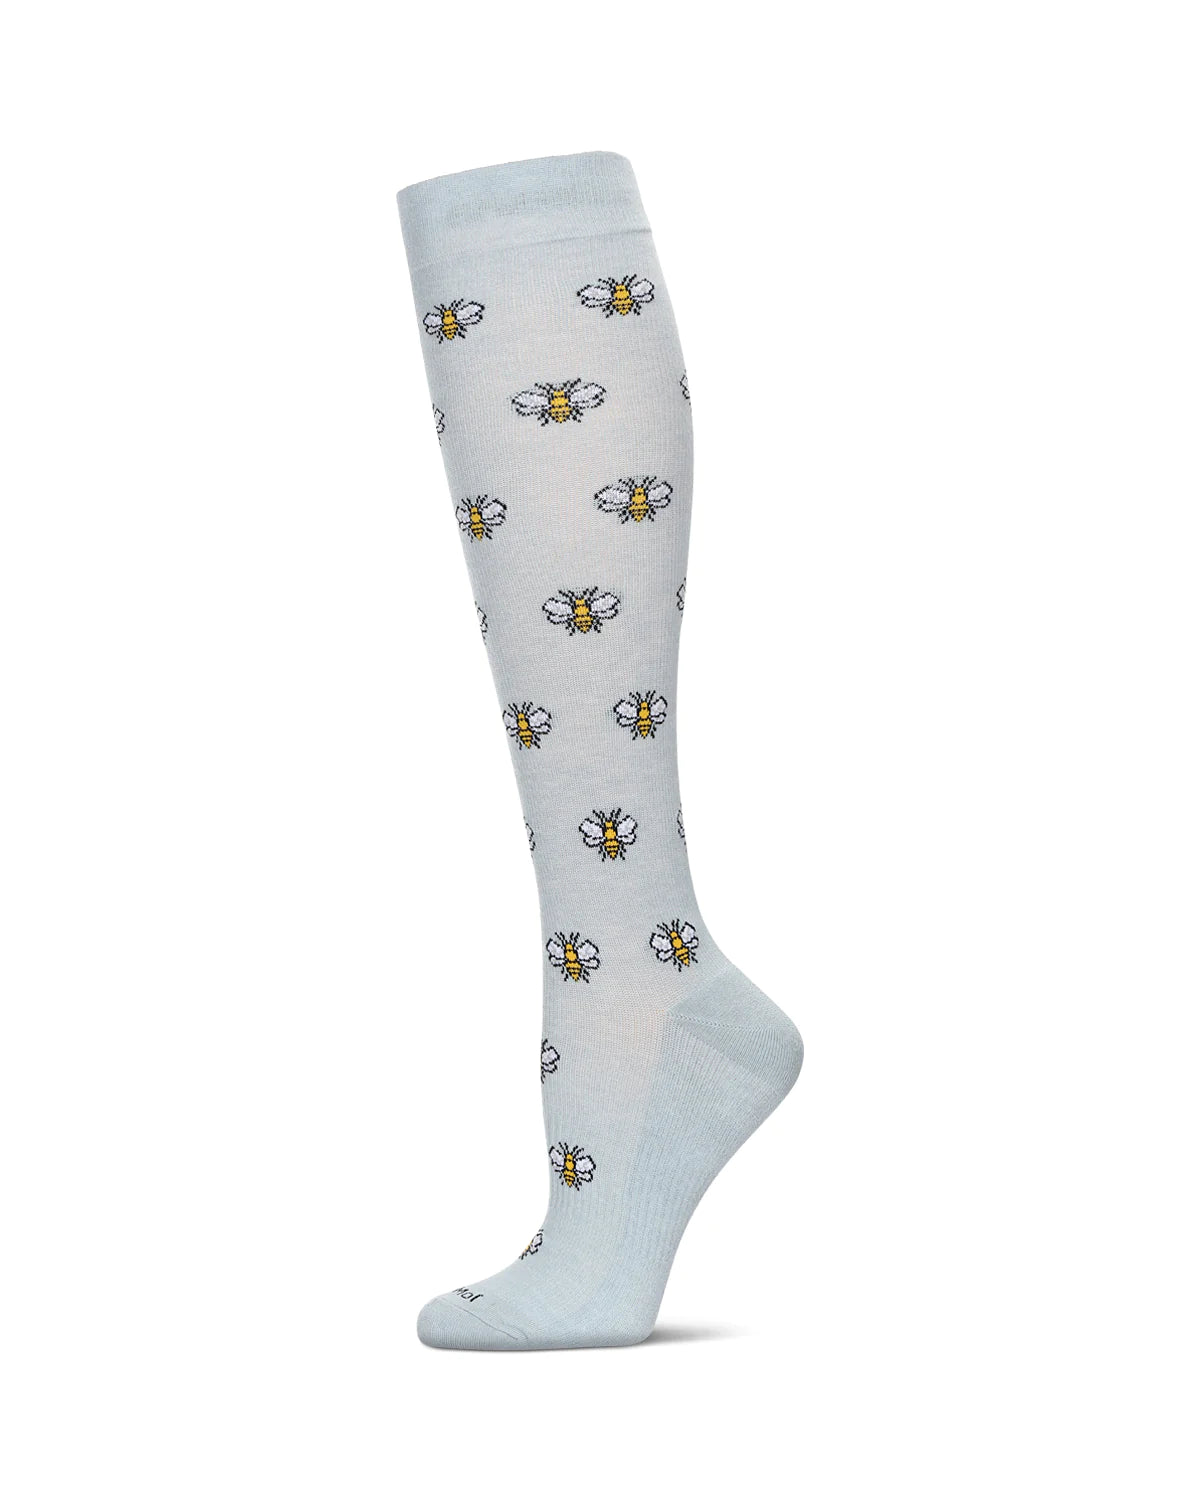 Busy Bee Women's Bamboo Compression Socks - The Sockery